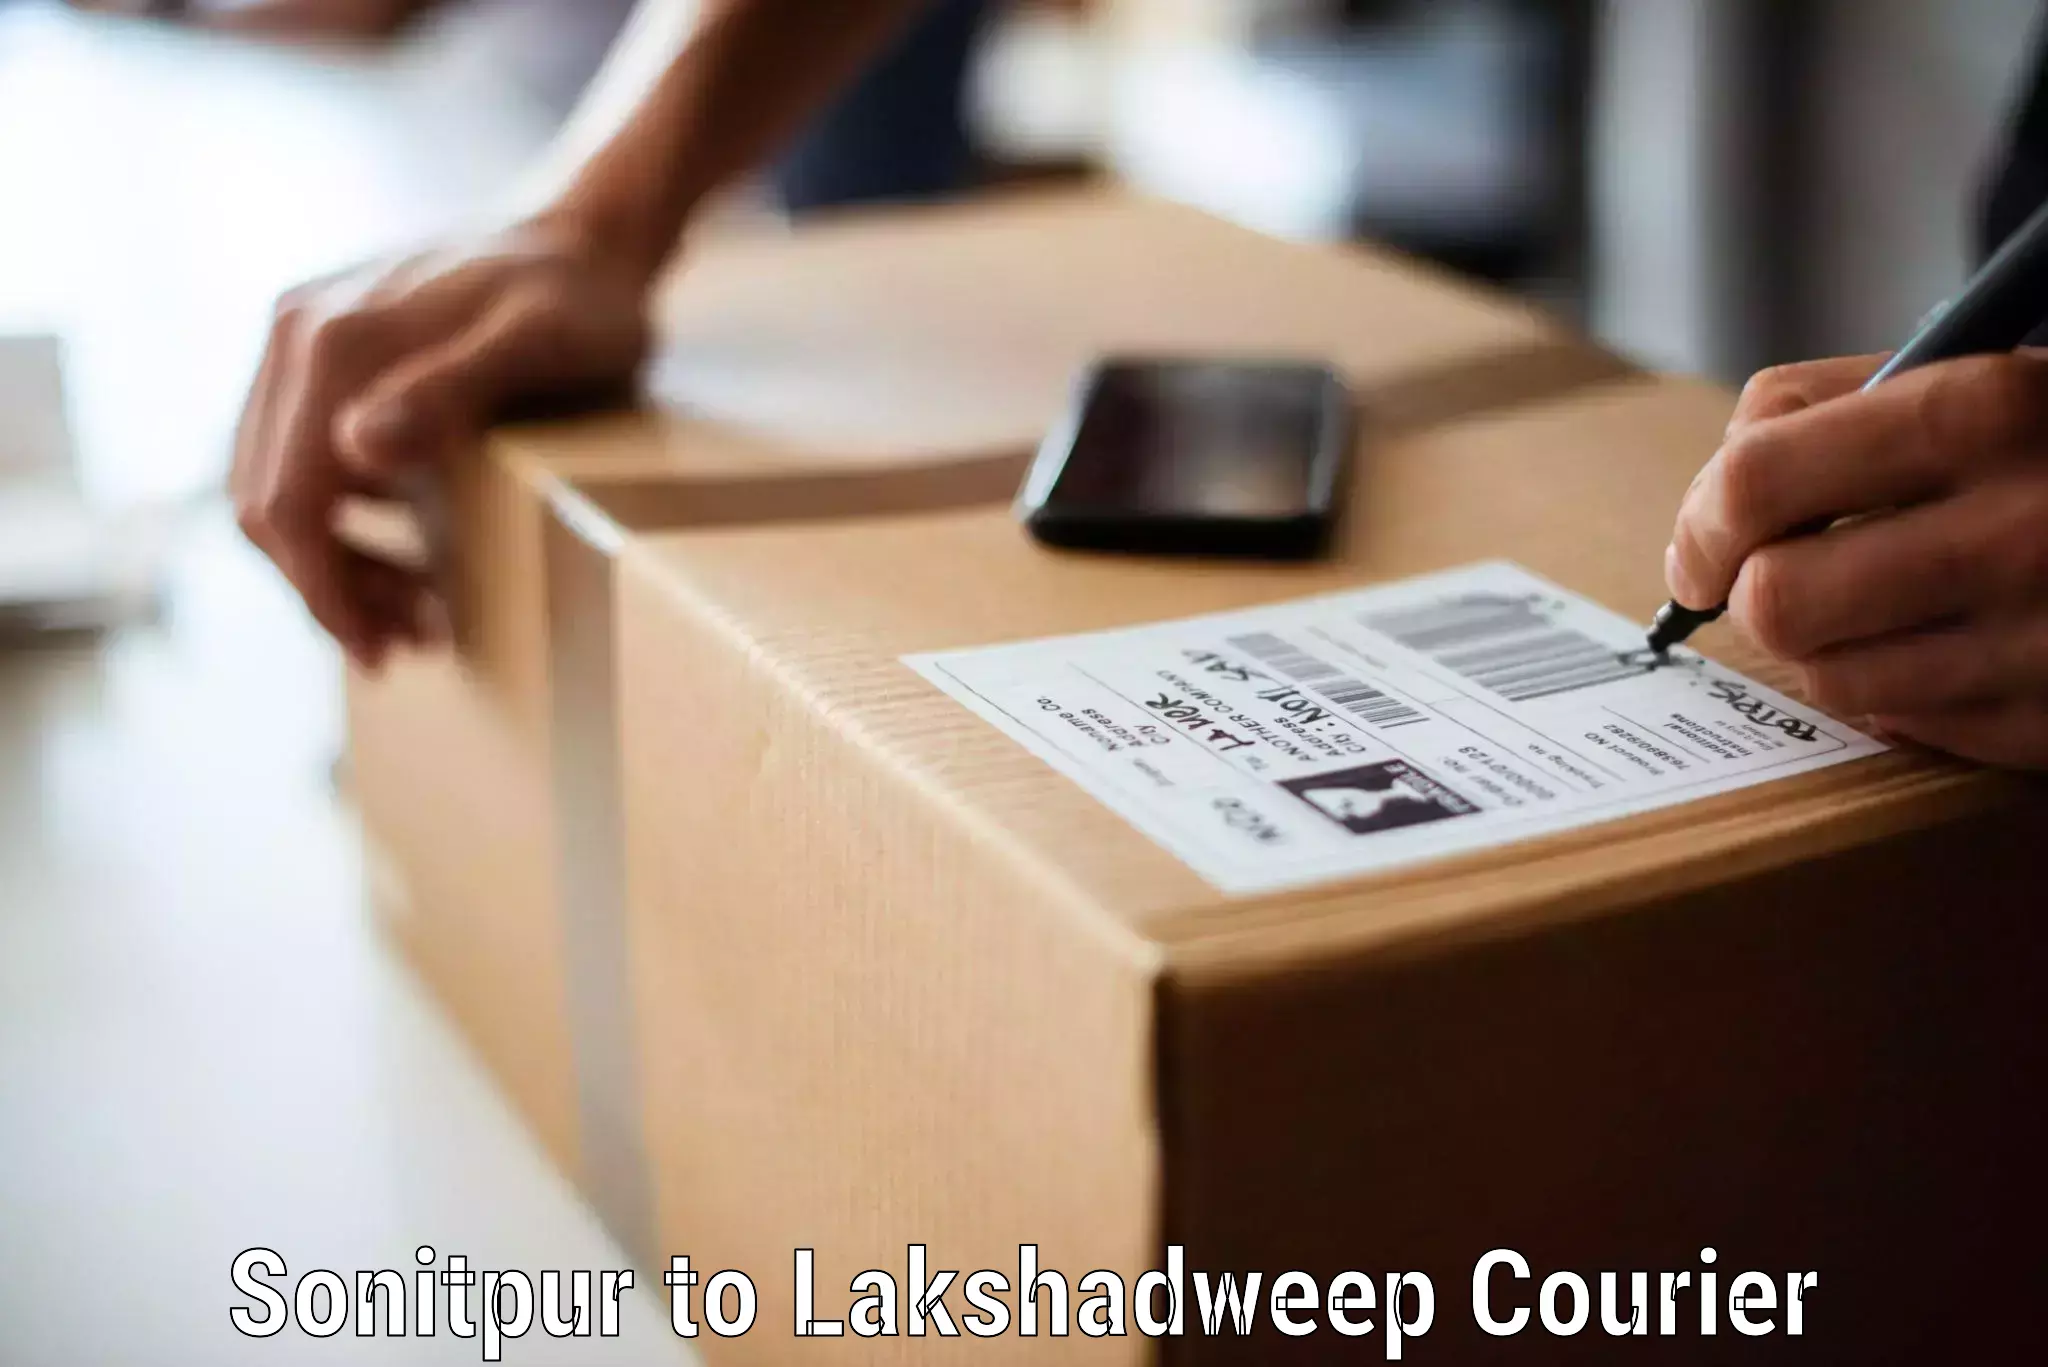 Home furniture relocation in Sonitpur to Lakshadweep